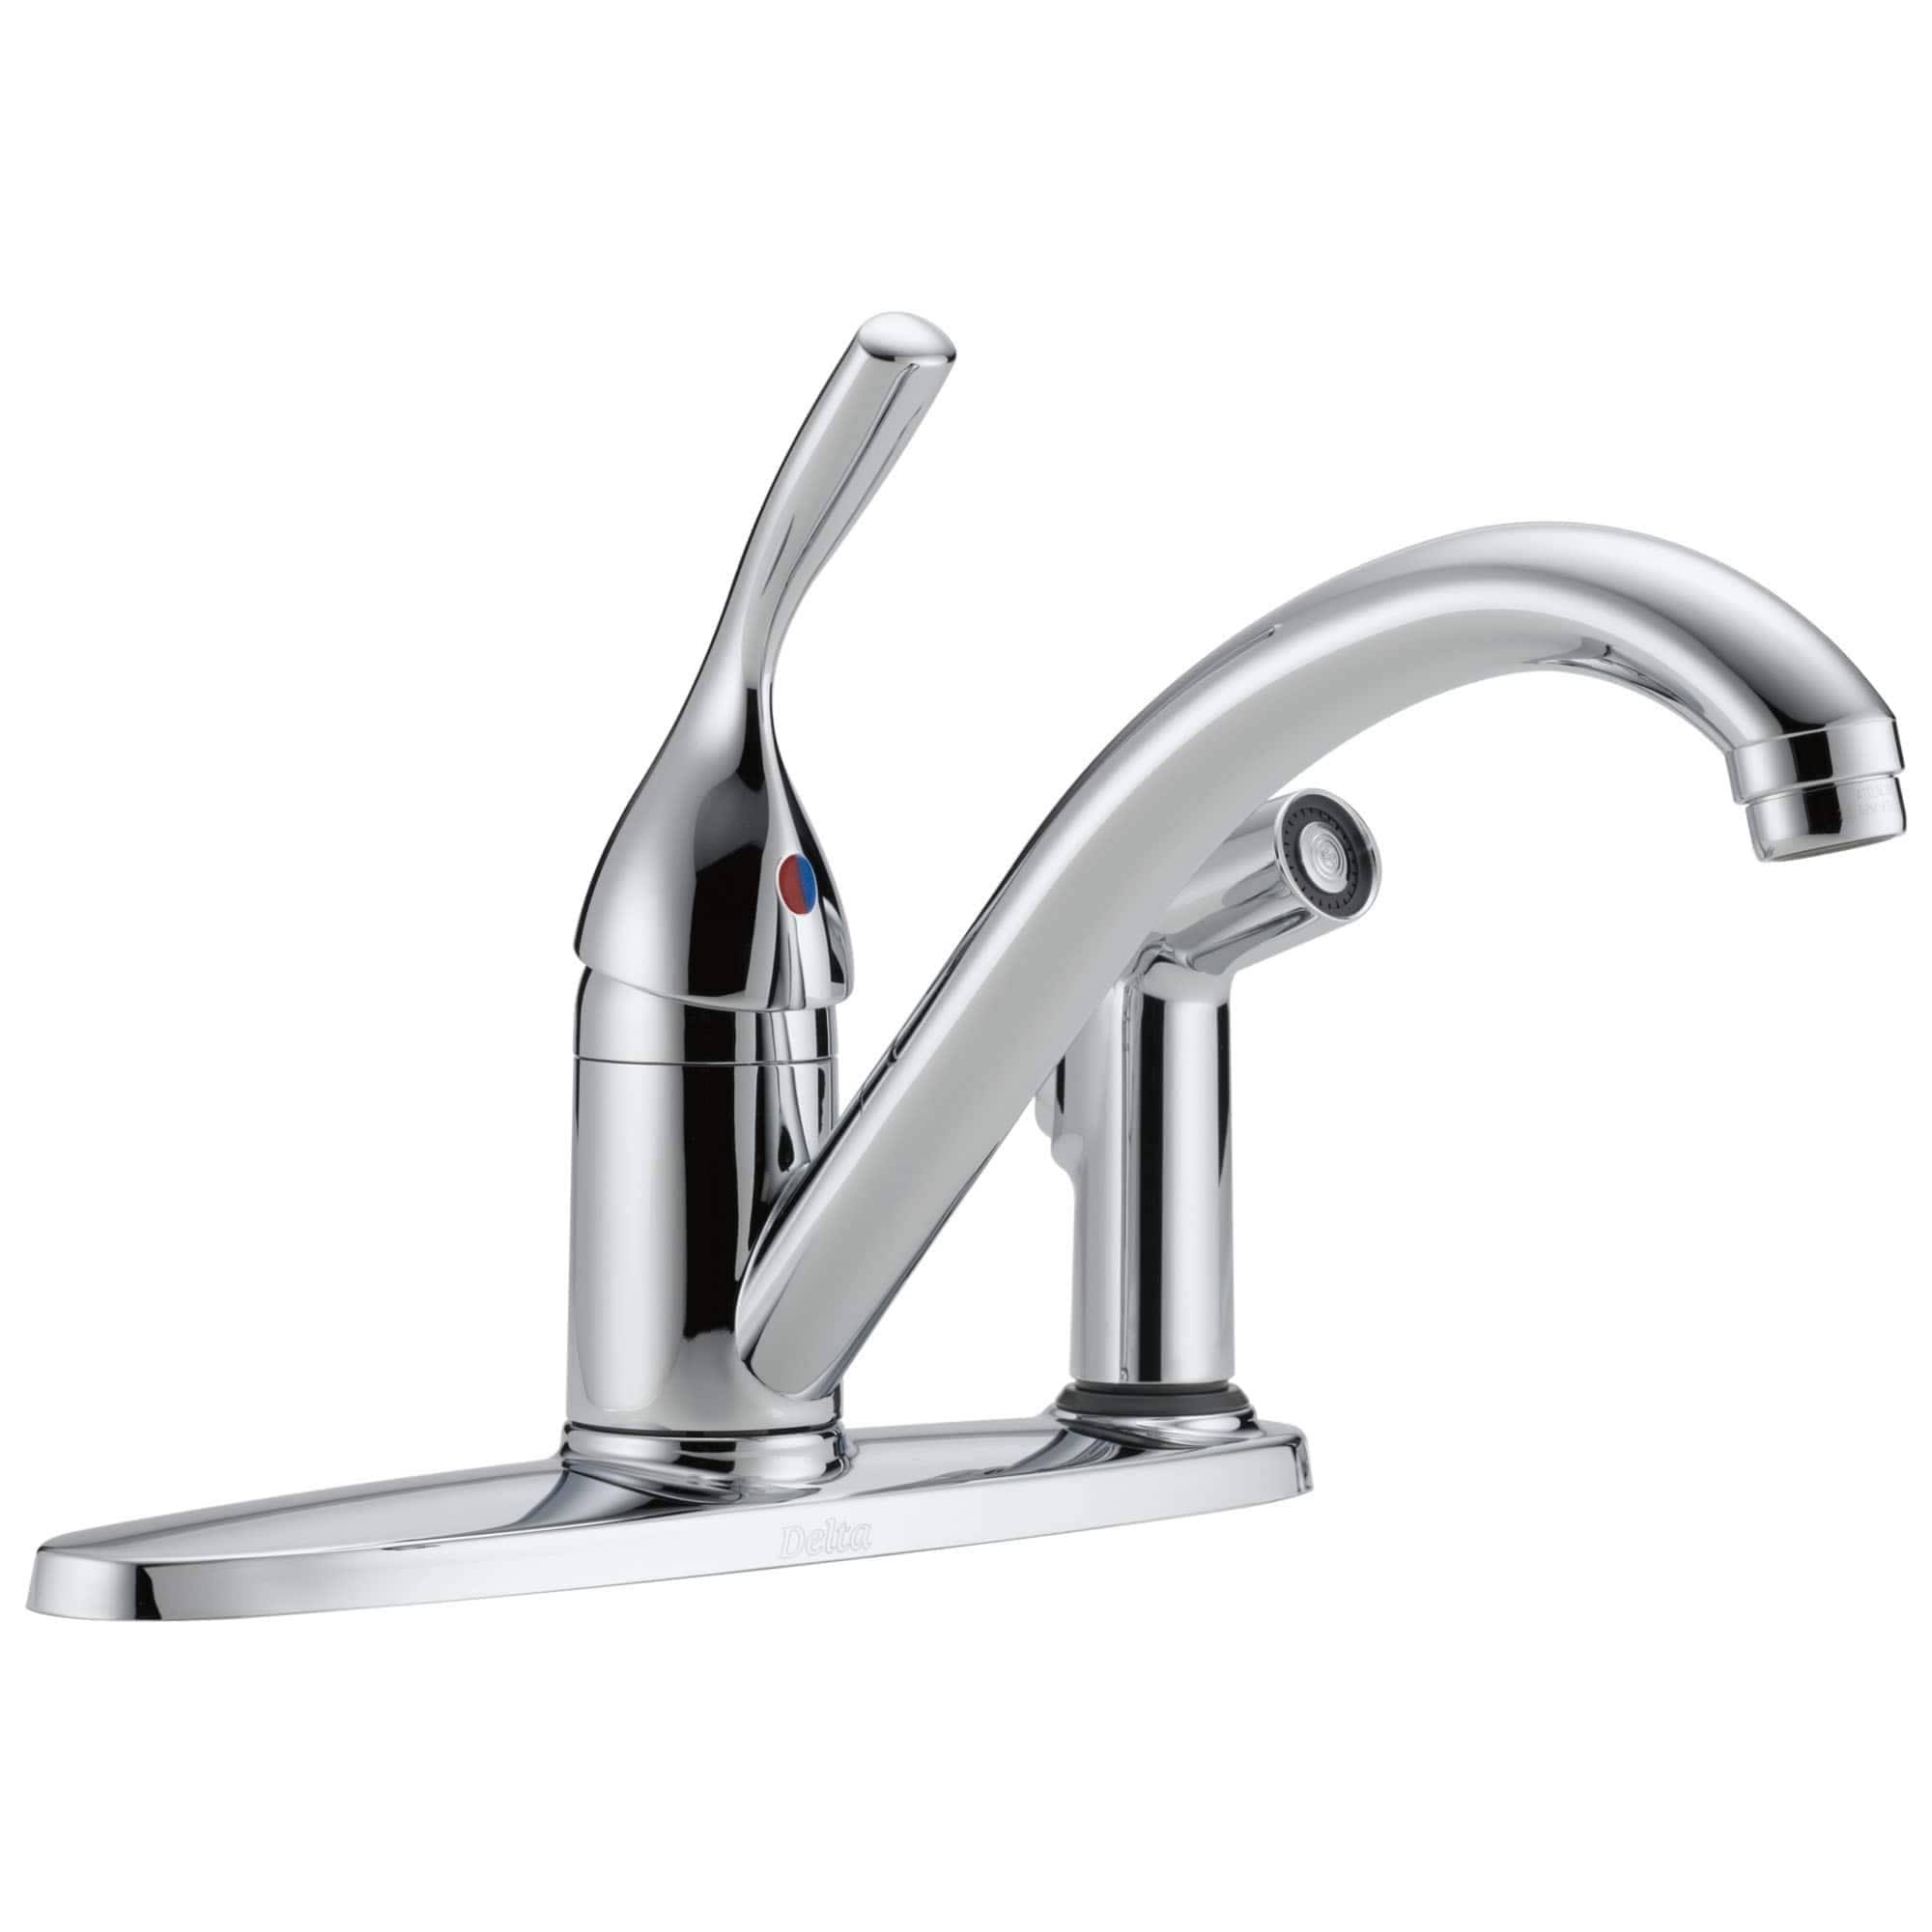 Classic Single Handle Kitchen Faucet with Integral Spray - Chrome